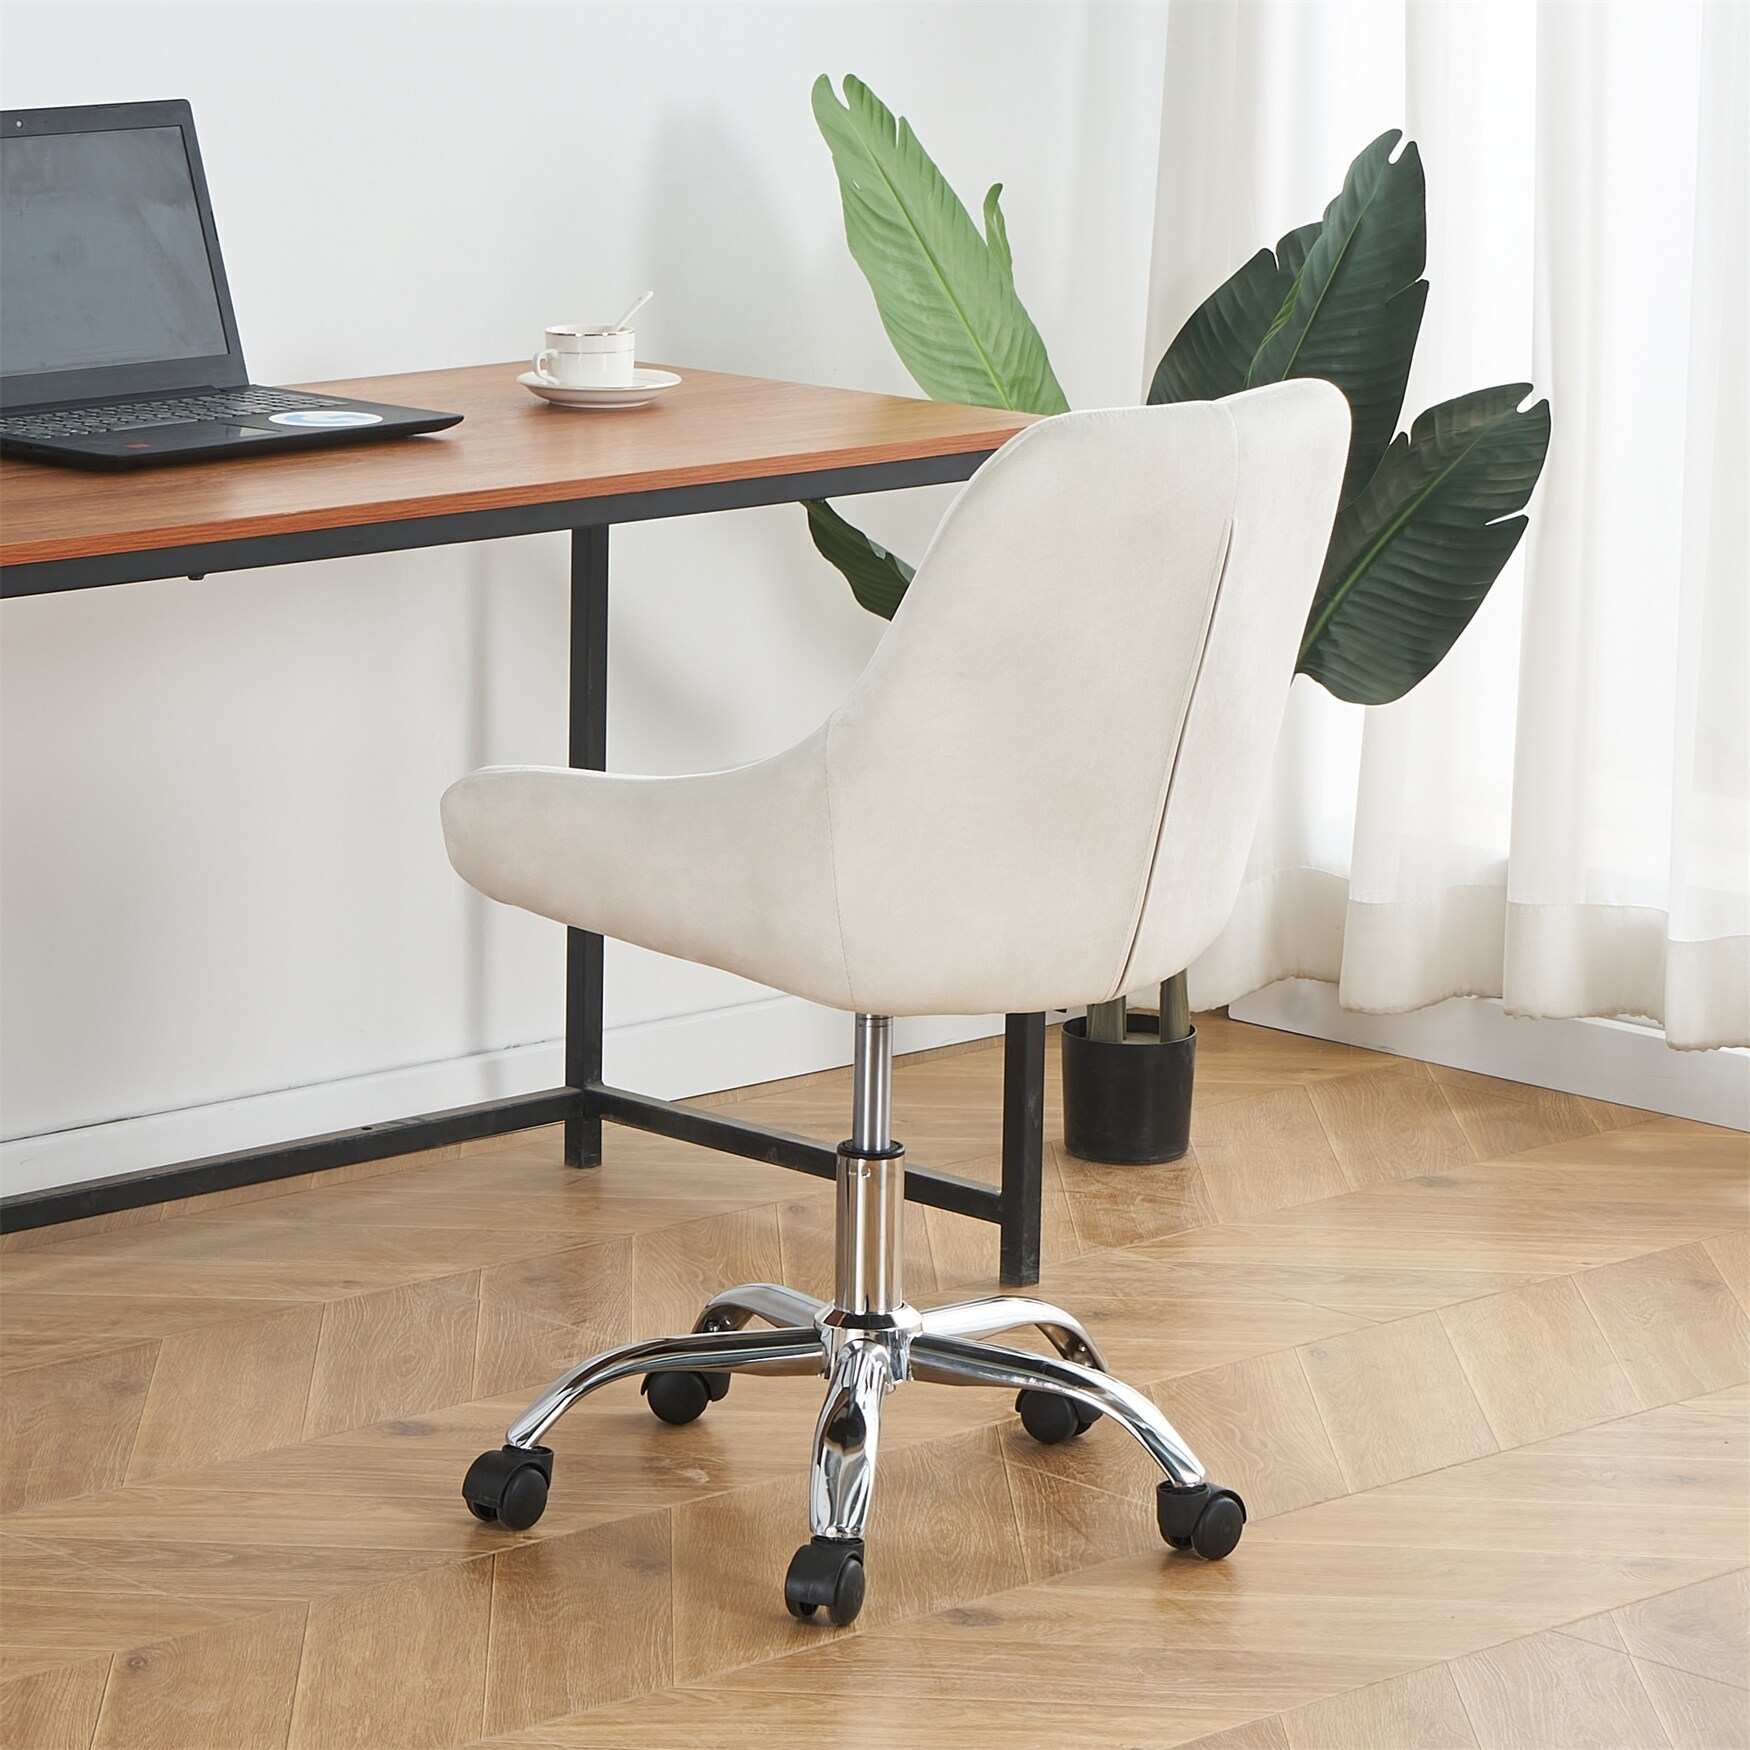 https://ak1.ostkcdn.com/images/products/is/images/direct/0f4f6e6373409dc5f0bf8408e47017ac8186eafc/Modern-Velvet-Fabric-Office-Chair%2C-Lift-Adjustment-%28Set-of-1%29.jpg